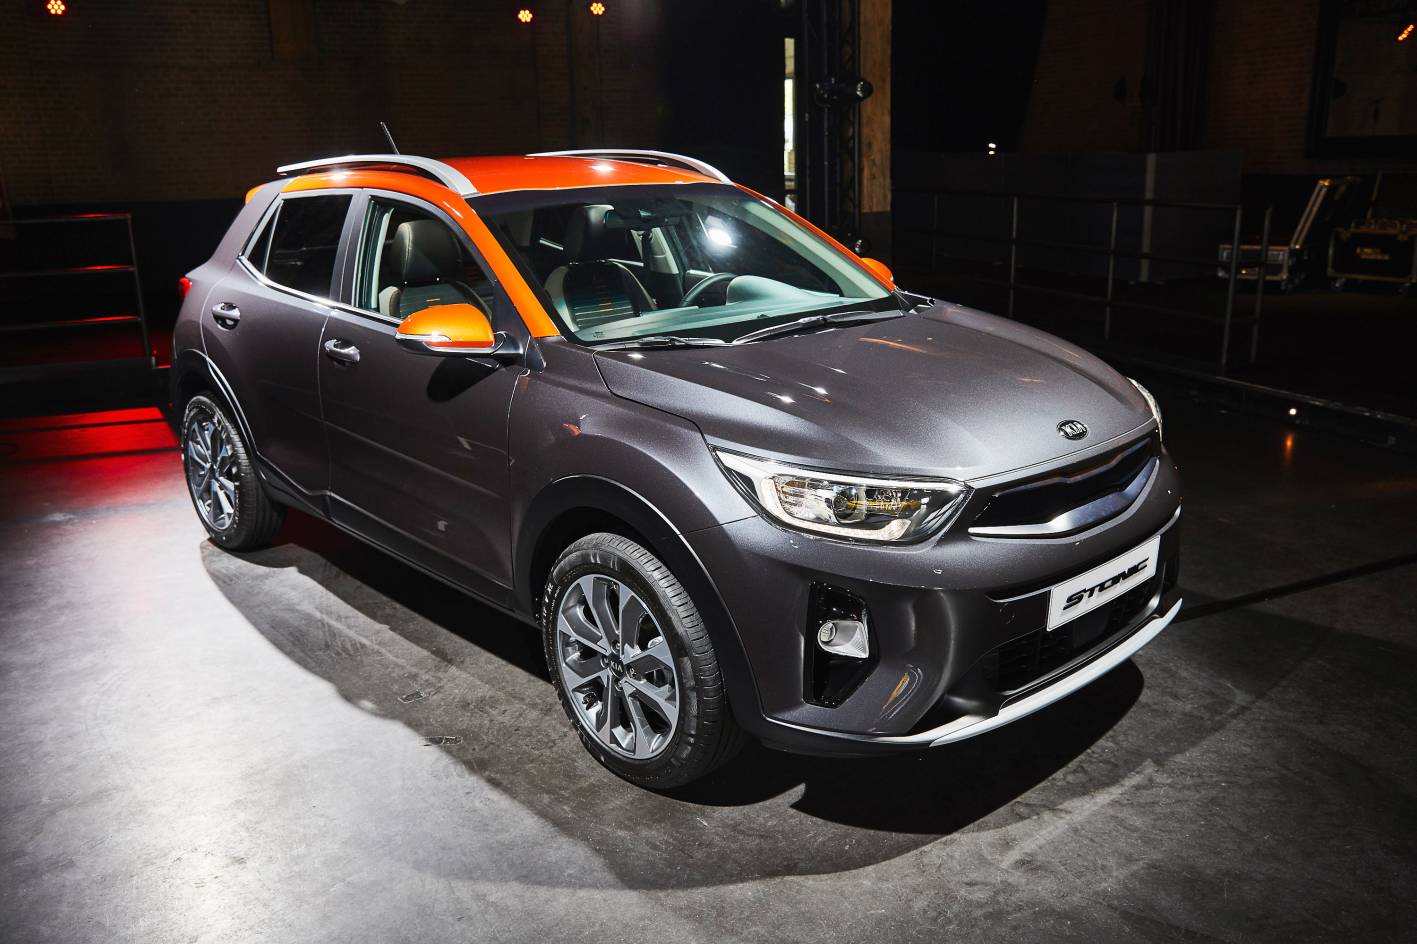 Kia Stonic compact SUV unveiled - not for Australia - ForceGT.com